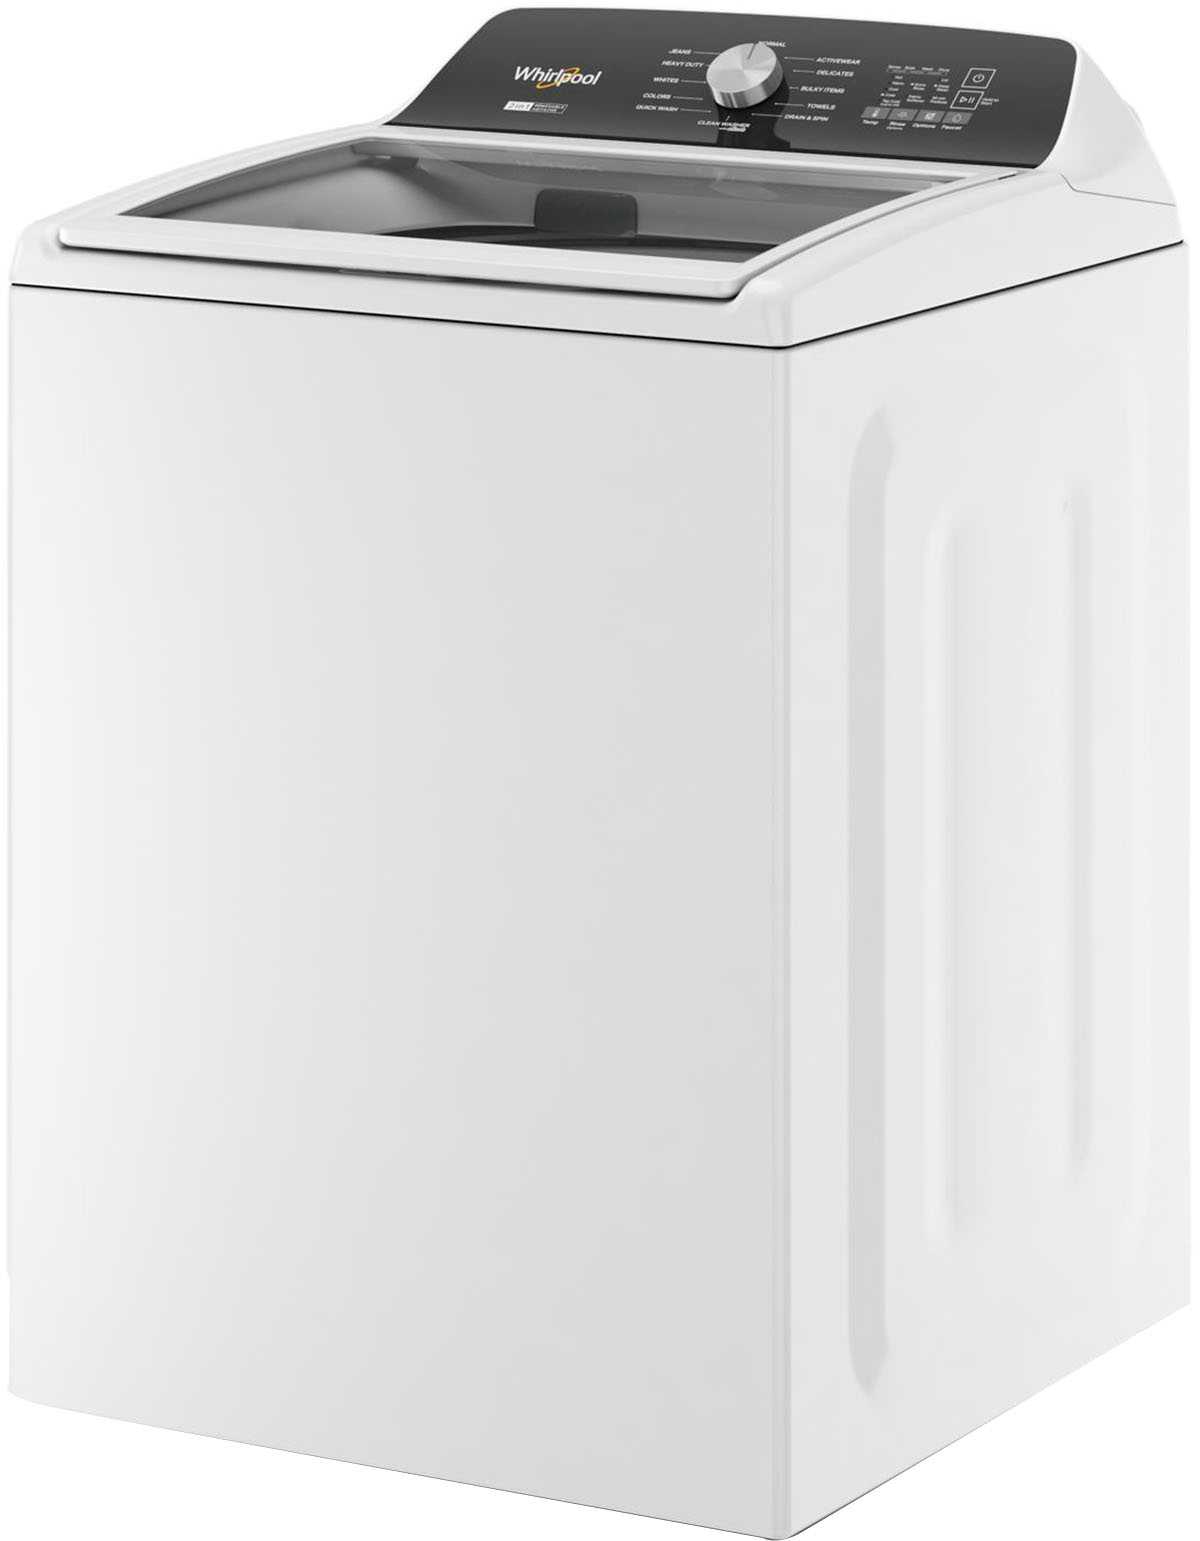 Left View: Whirlpool - 4.7-4.8 Cu. Ft. Top Load Washer with 2 in 1 Removable Agitator - White